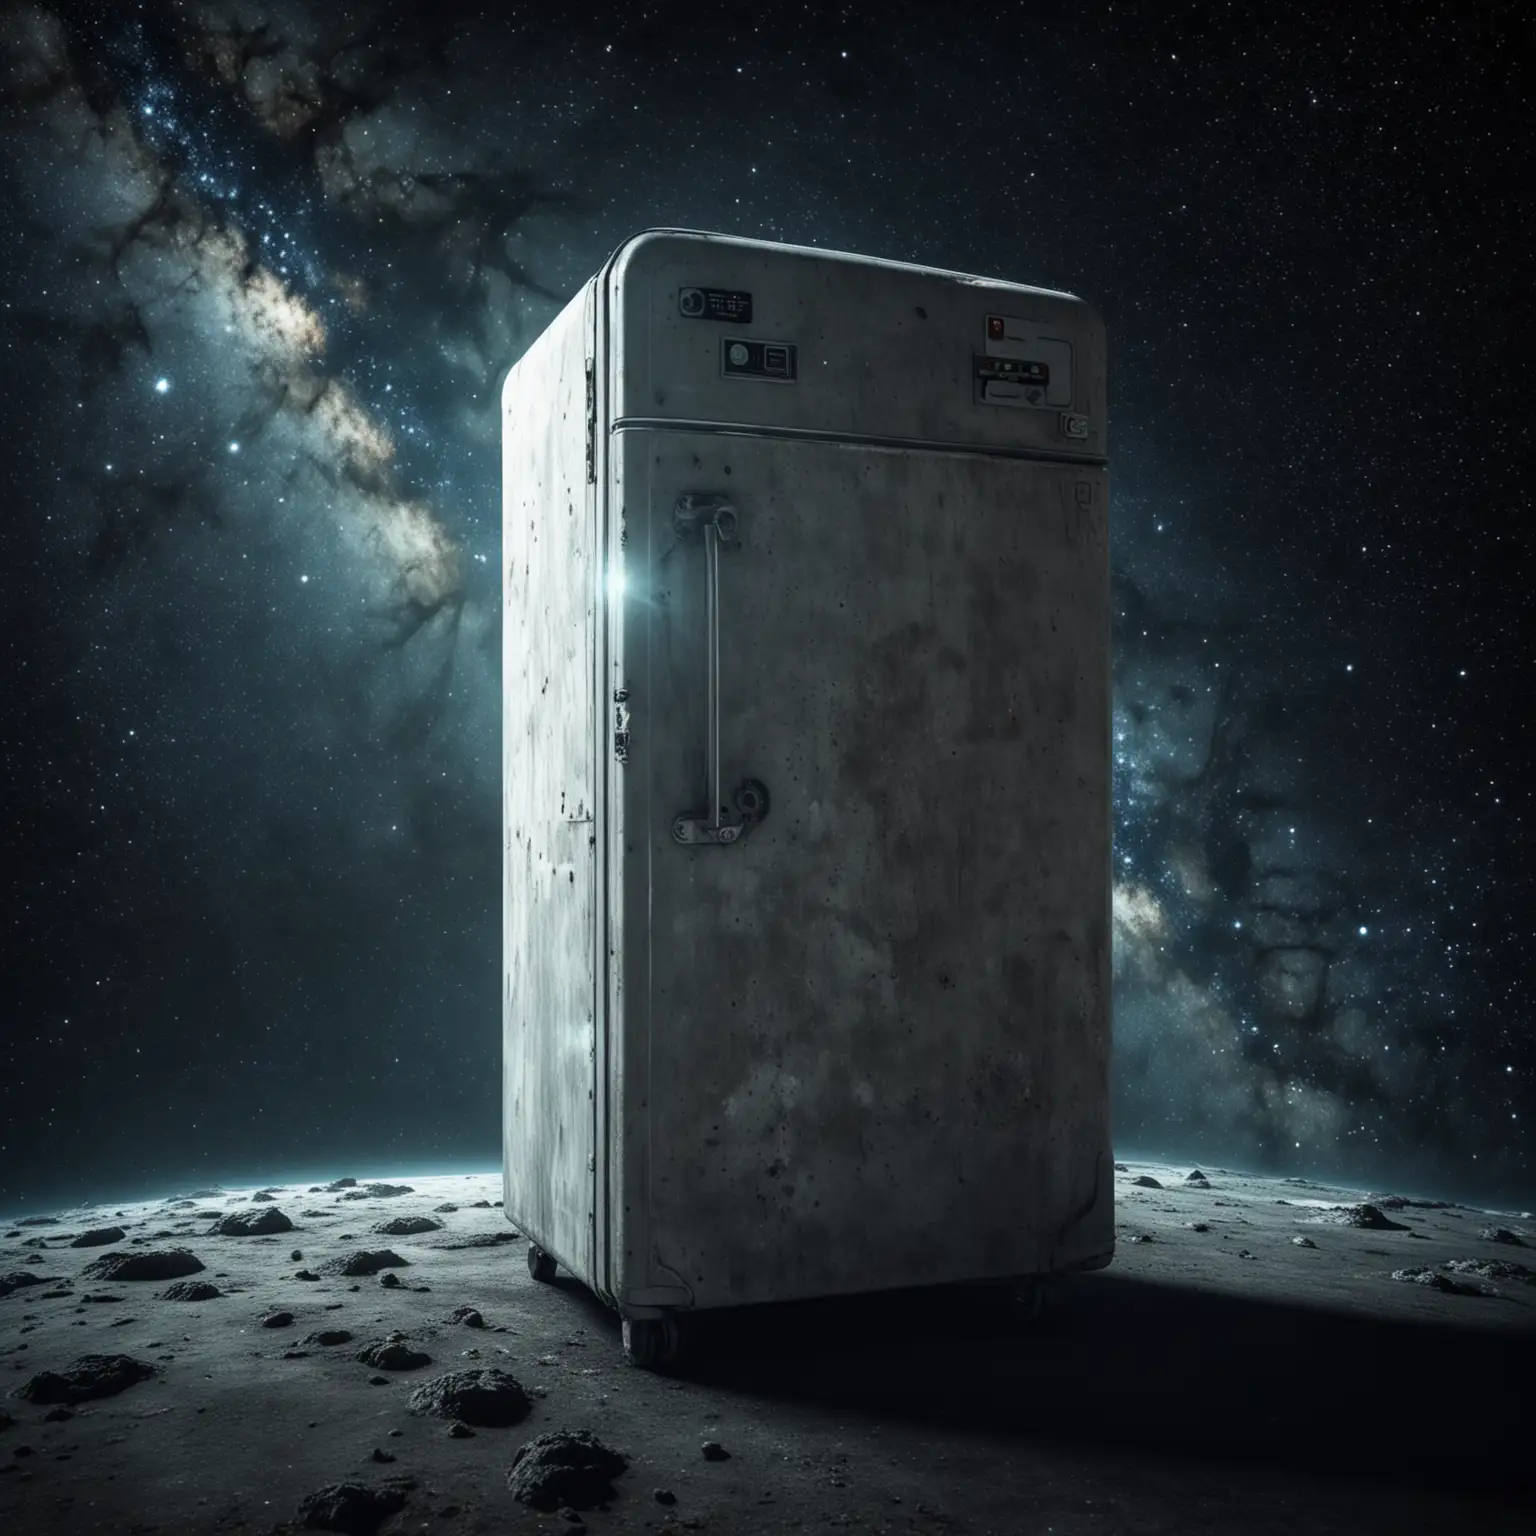 an old refrigerator travelling through deep space
